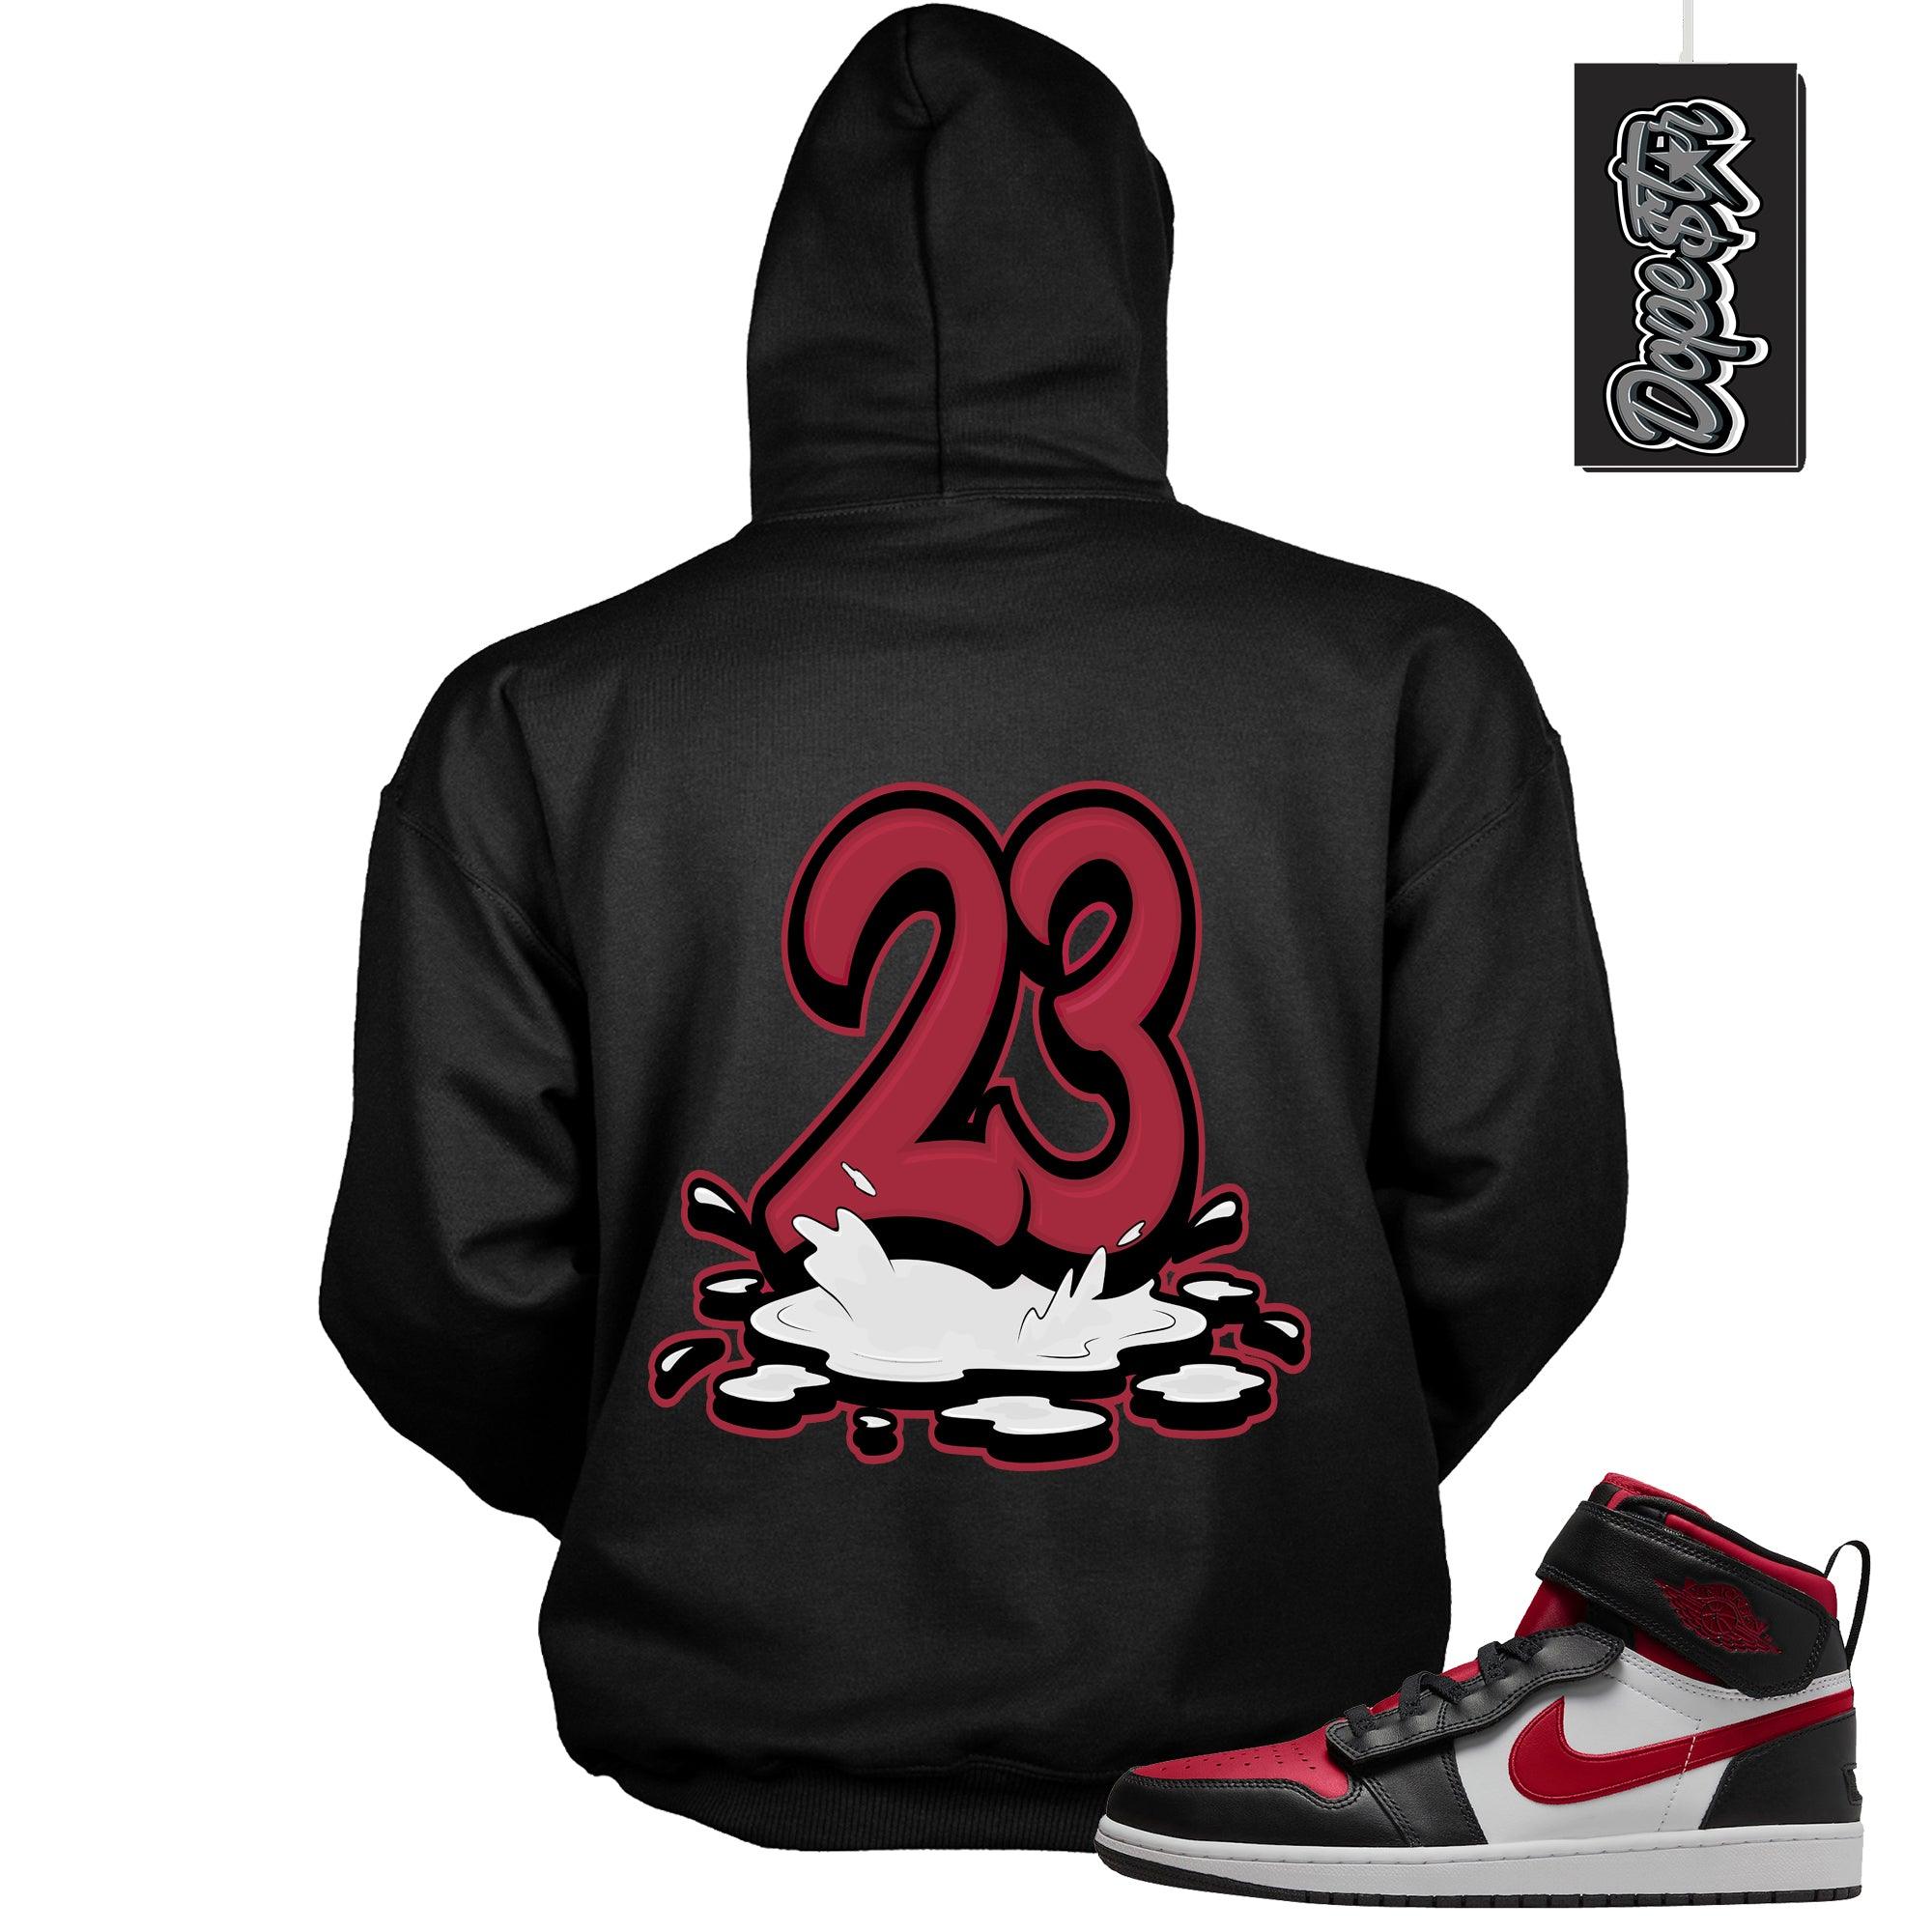 23 Melting Hoodie AJ 1 High FlyEase Black White Fire Red photo